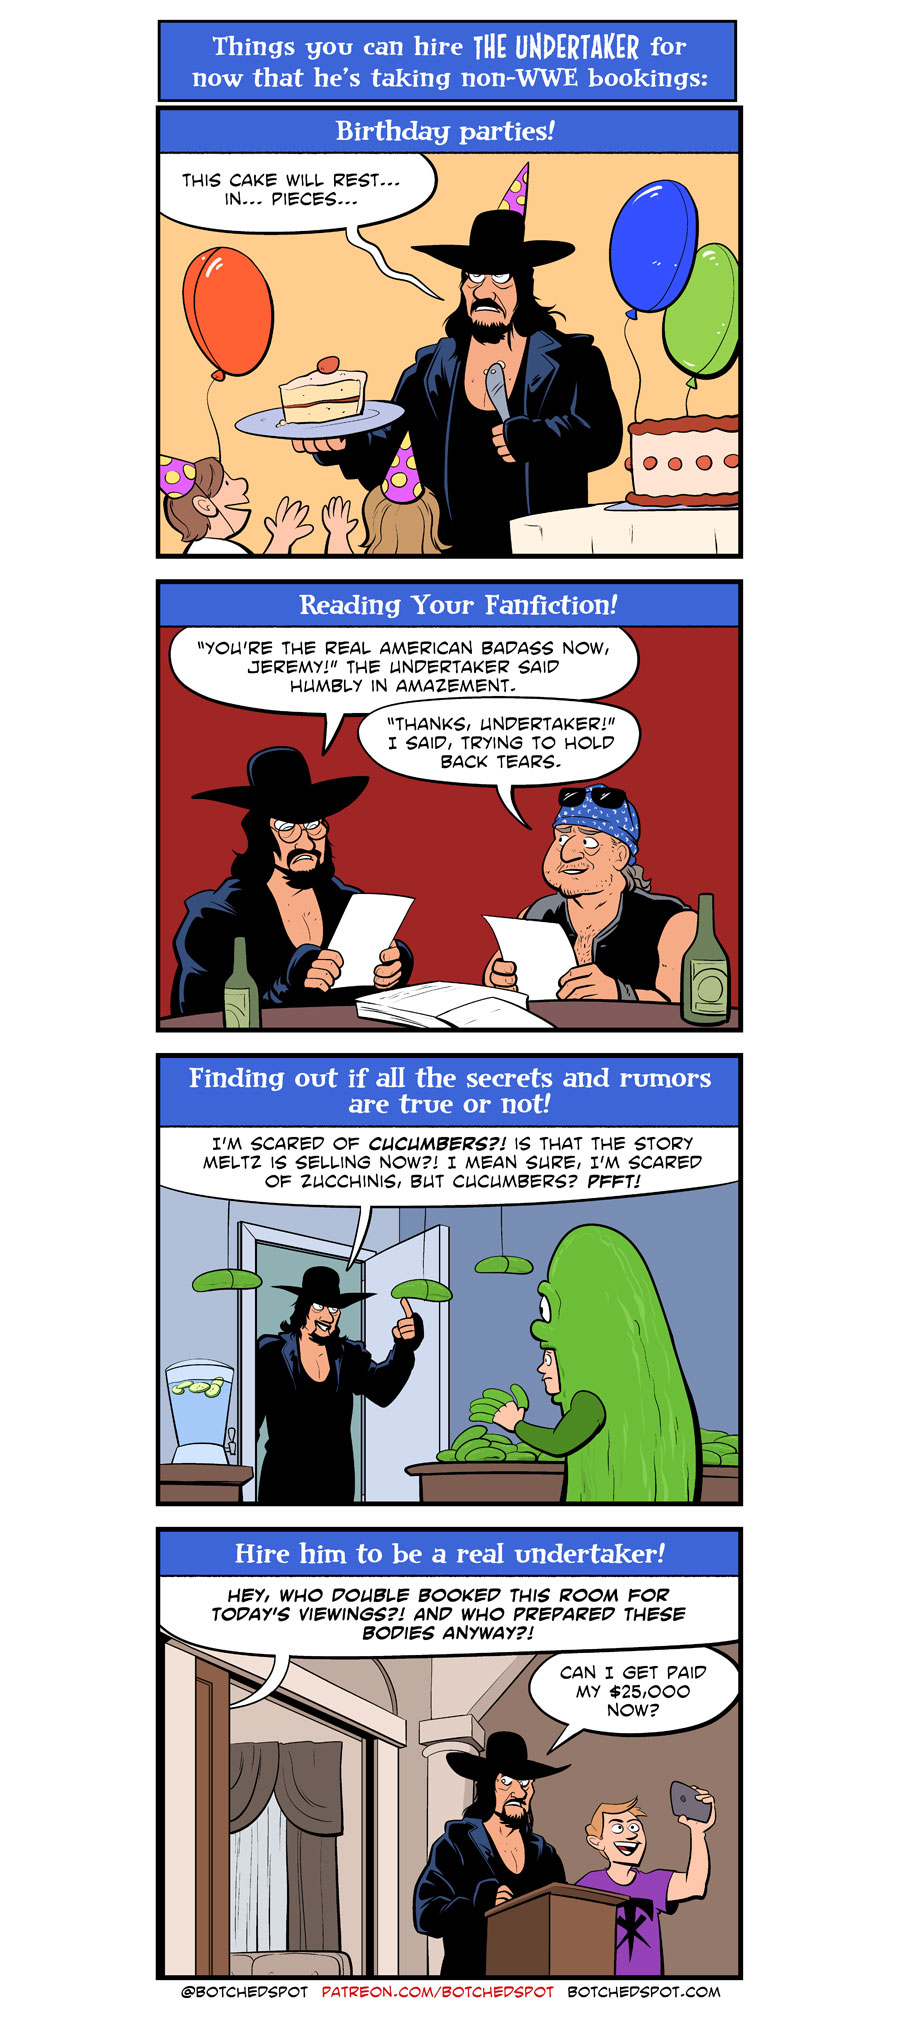 Things You Can Hire The Undertaker For!